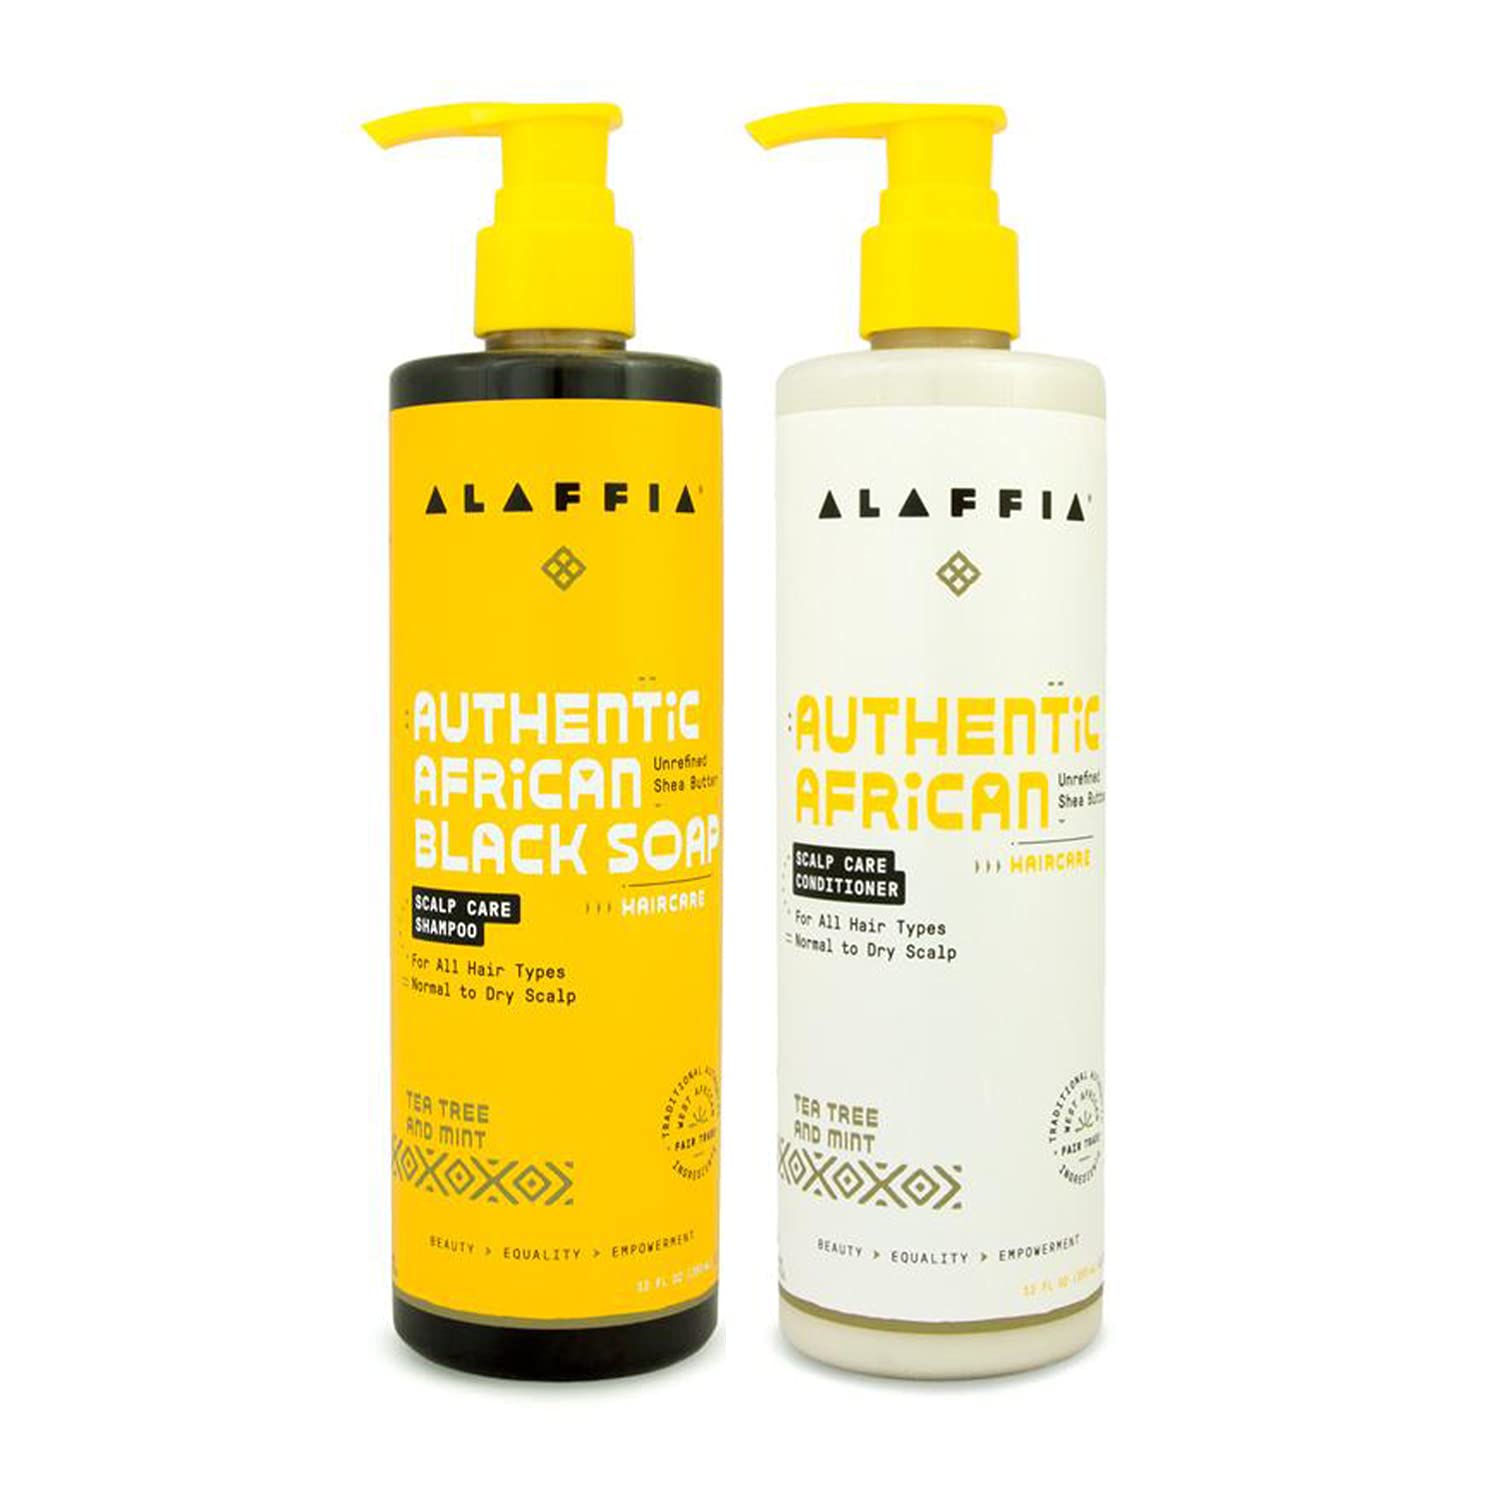 Alaffia Authentic African Black Soap Scalp Care Shampoo and Conditioner - For All Hair Types Normal to Dry Scalp, Nourishes & Soothes the Scalp with Shea Butter & Neem Oil, Tea Tree & Mint, 12   Each